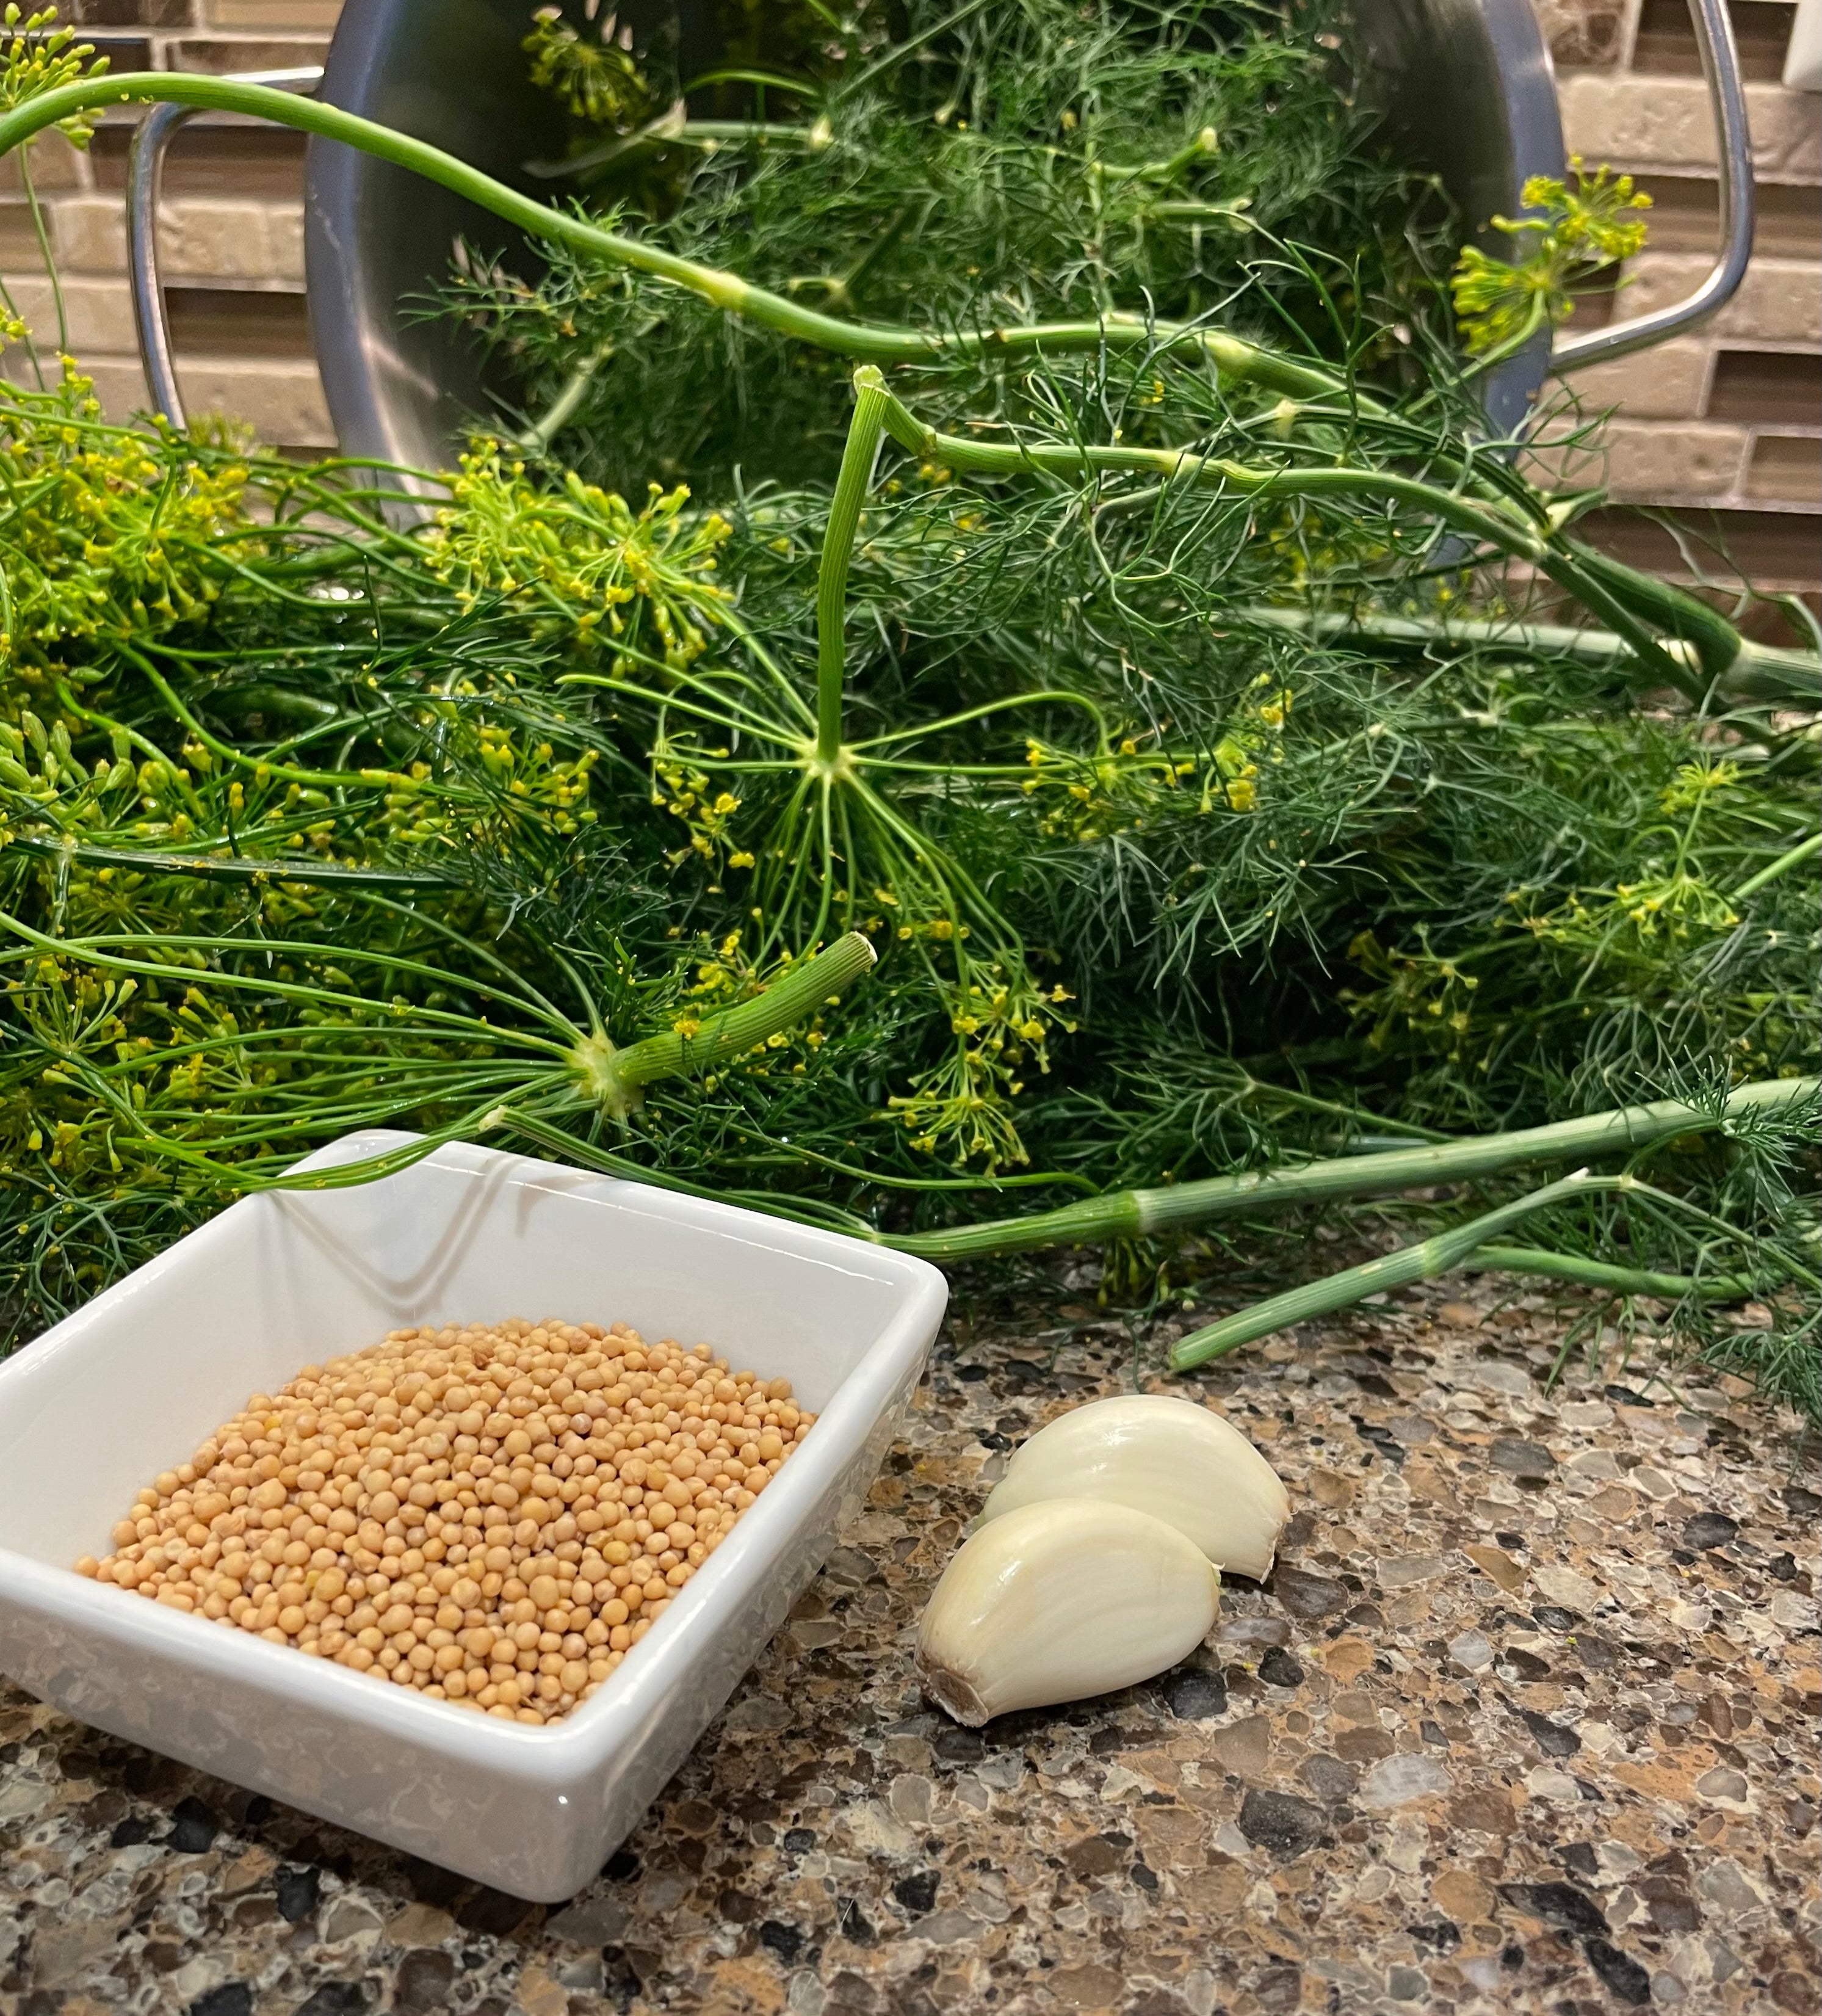 The fresh, fragrant dill and garlic used to season our gourmet, small-batch popcorn.